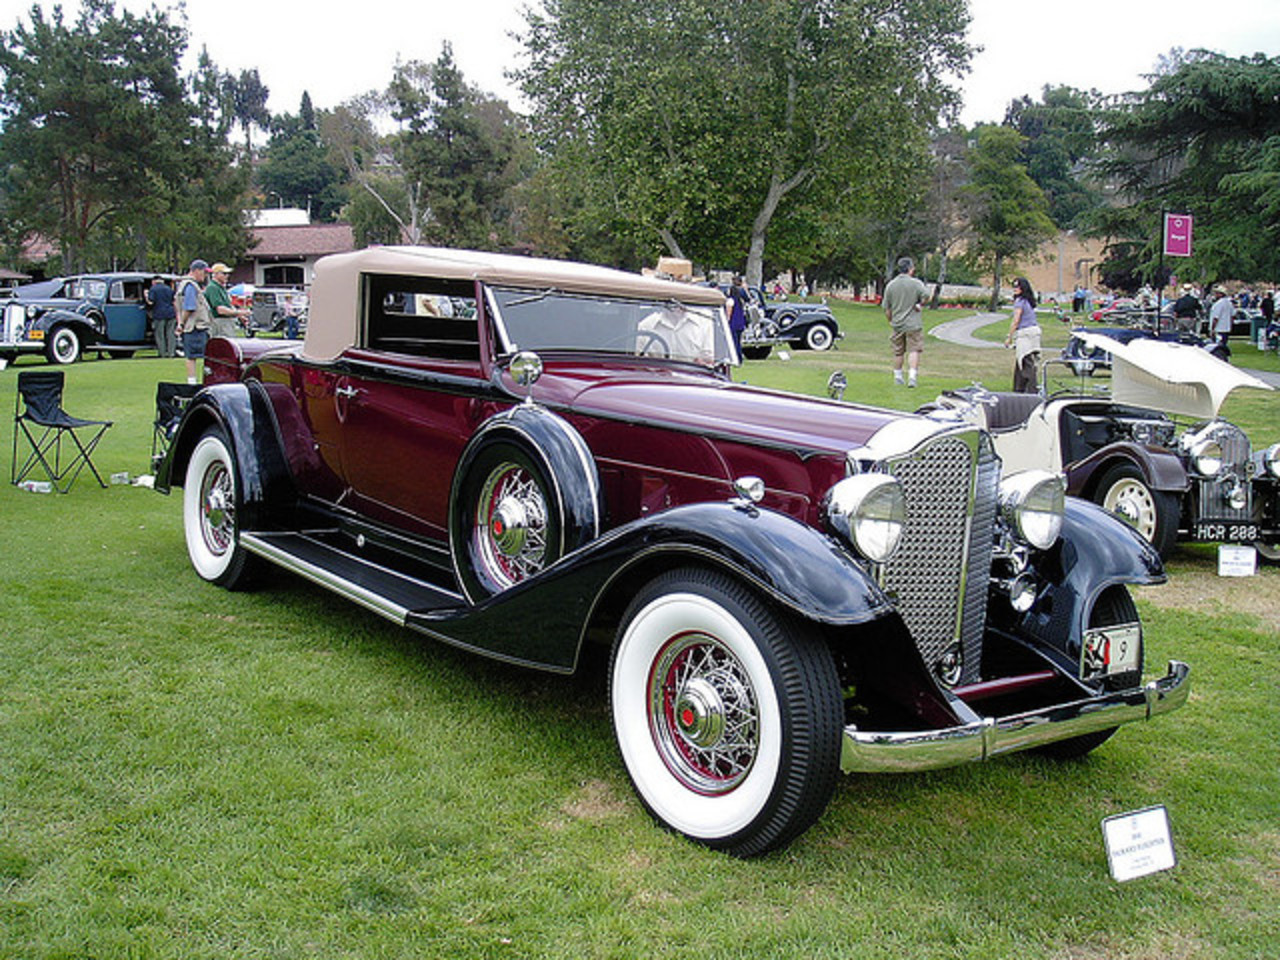 1932 Packard Roadster | Flickr - Photo Sharing!